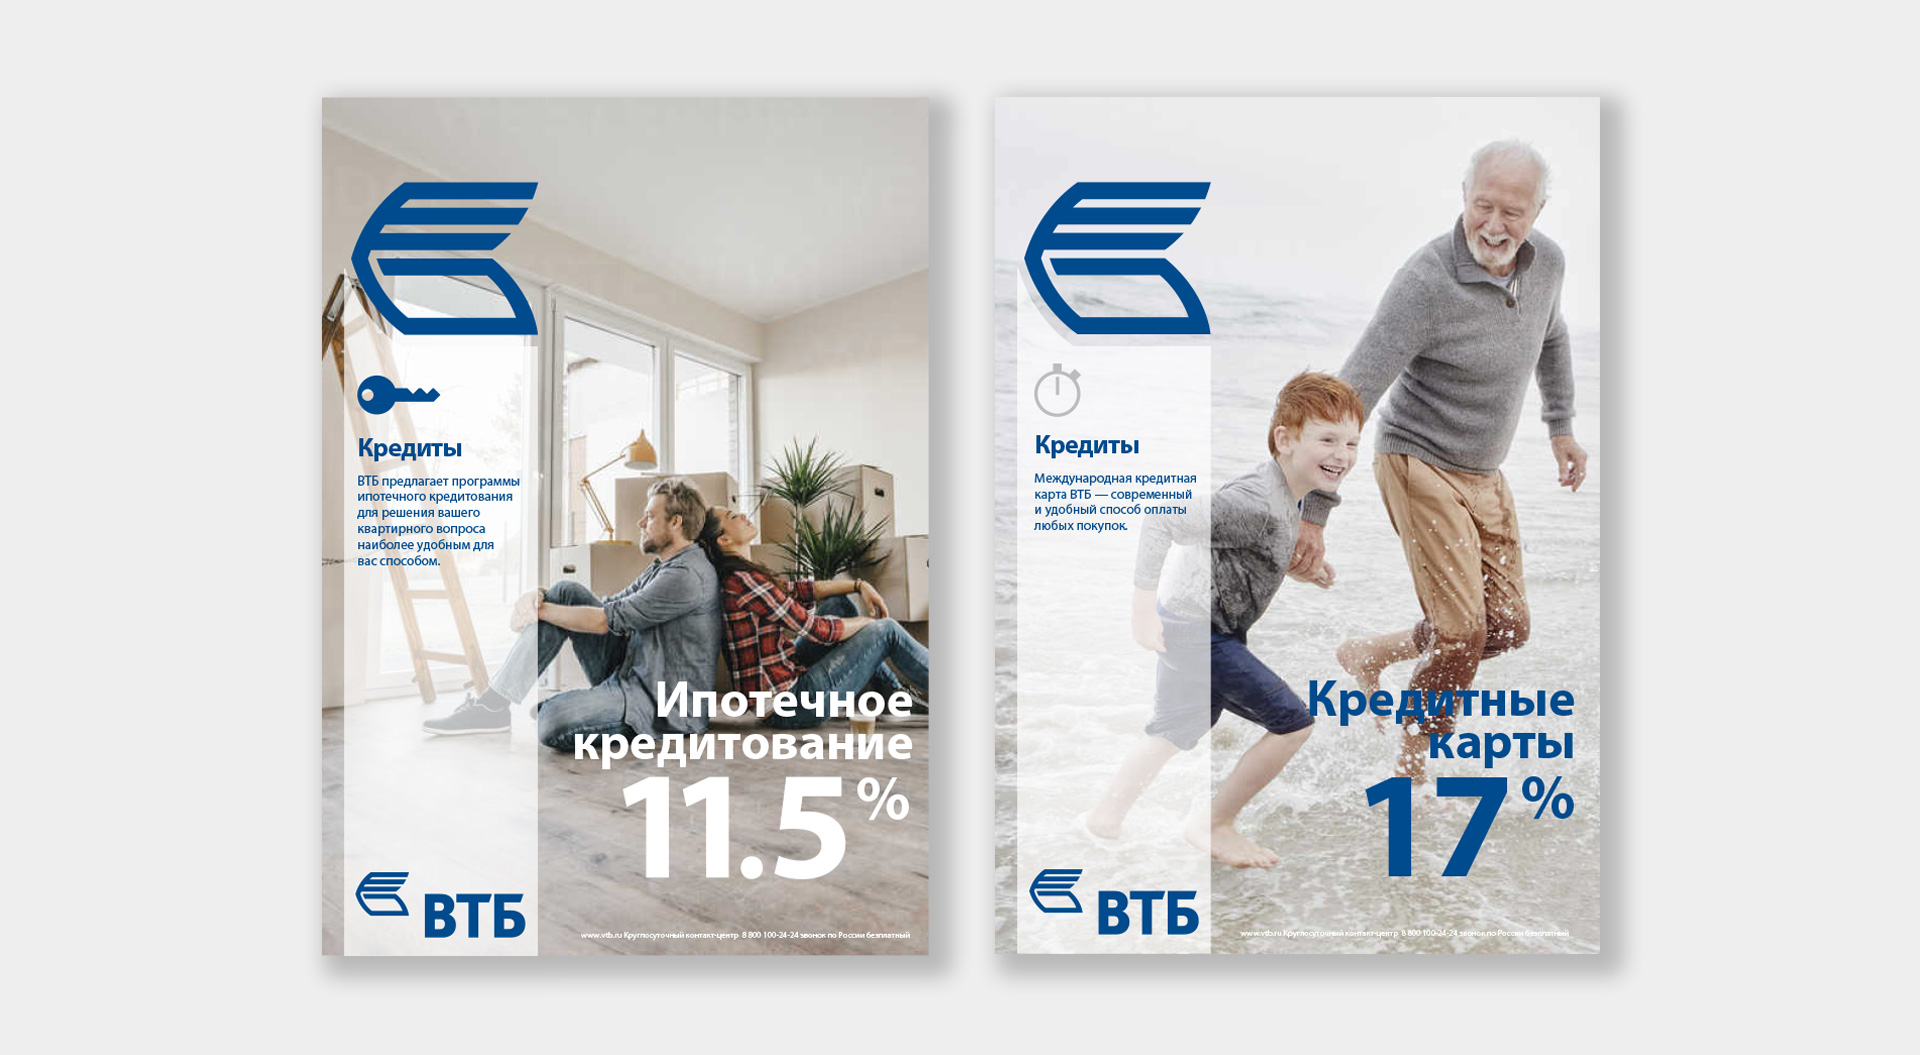 VTB Bank express branch and advertising communications cash loan poster